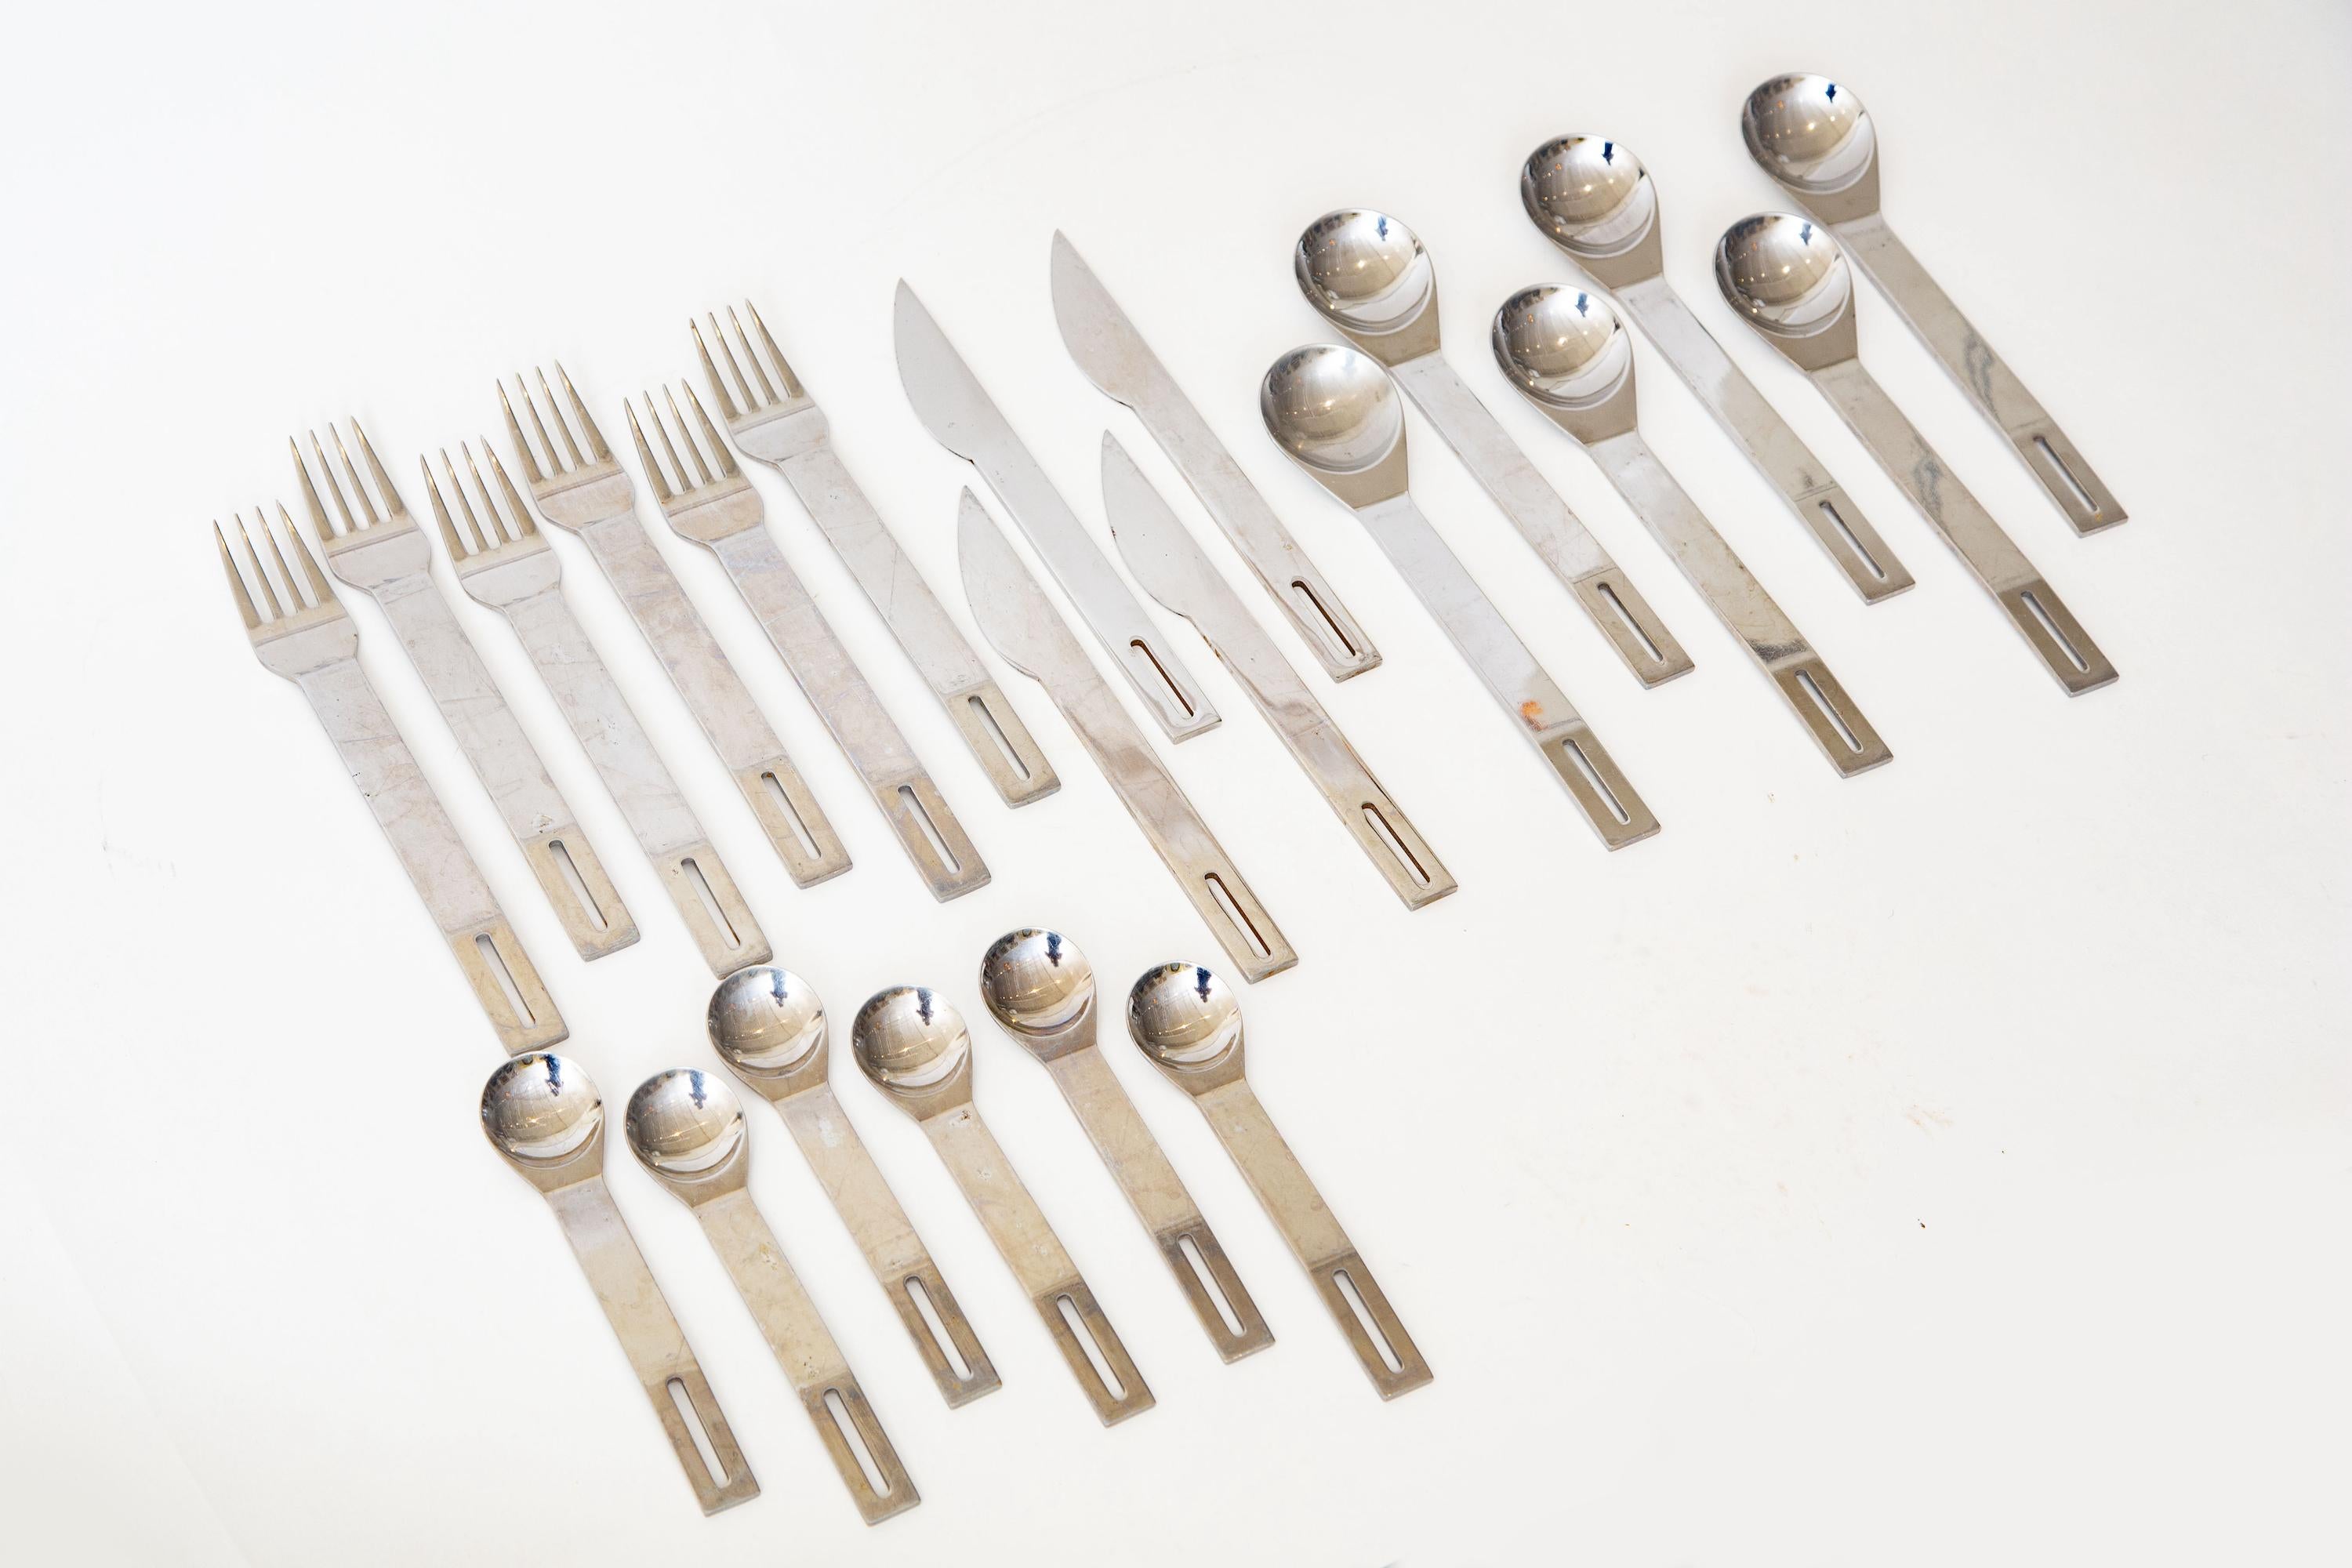 This architectural and sculptural flatware that is Studio Nova Japan is from the 80's. It is a set of 6 but missing 2 of the knives. It is stainless steel and marked stainless Japan. It has not been professionally polished. This is an uncommon set